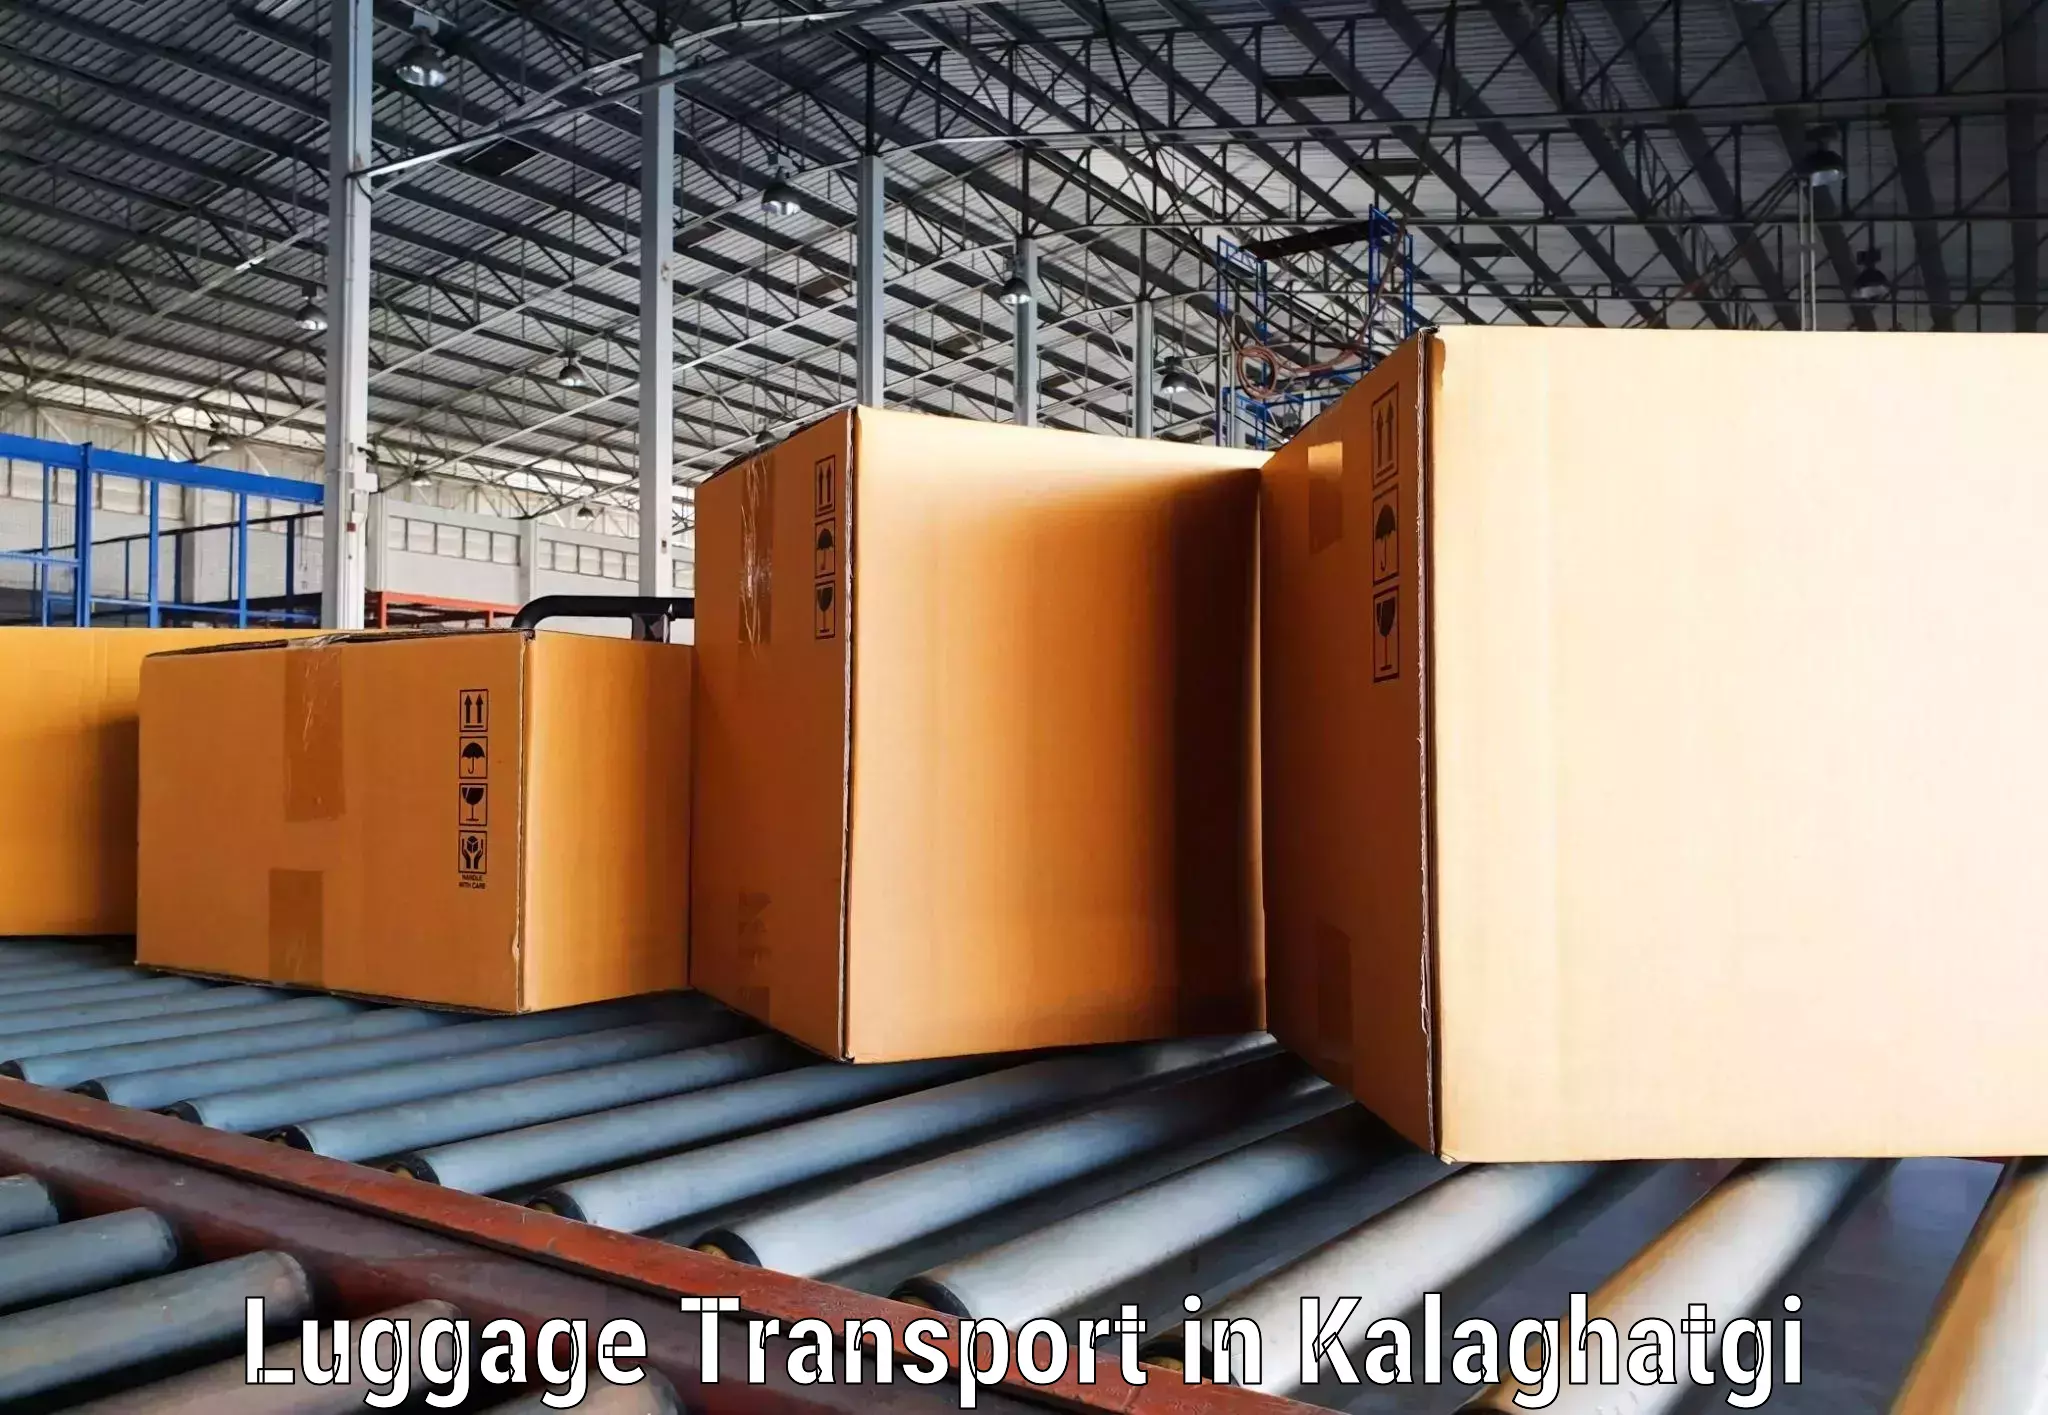 Luggage transport consultancy in Kalaghatgi